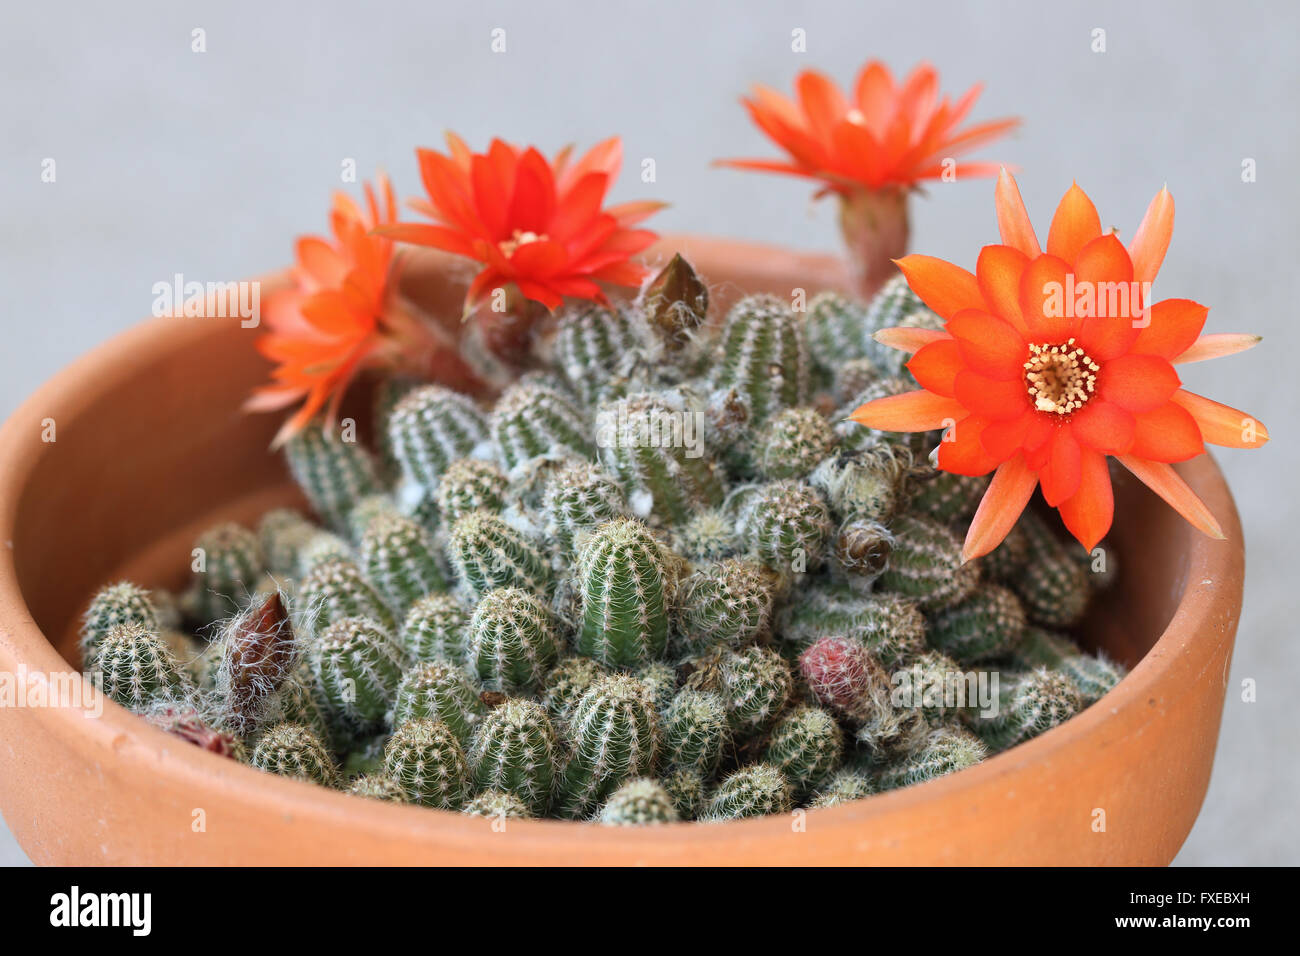 Close up image of flowering Echinopsis chamaecereus or also known as Peanut cactus Stock Photo